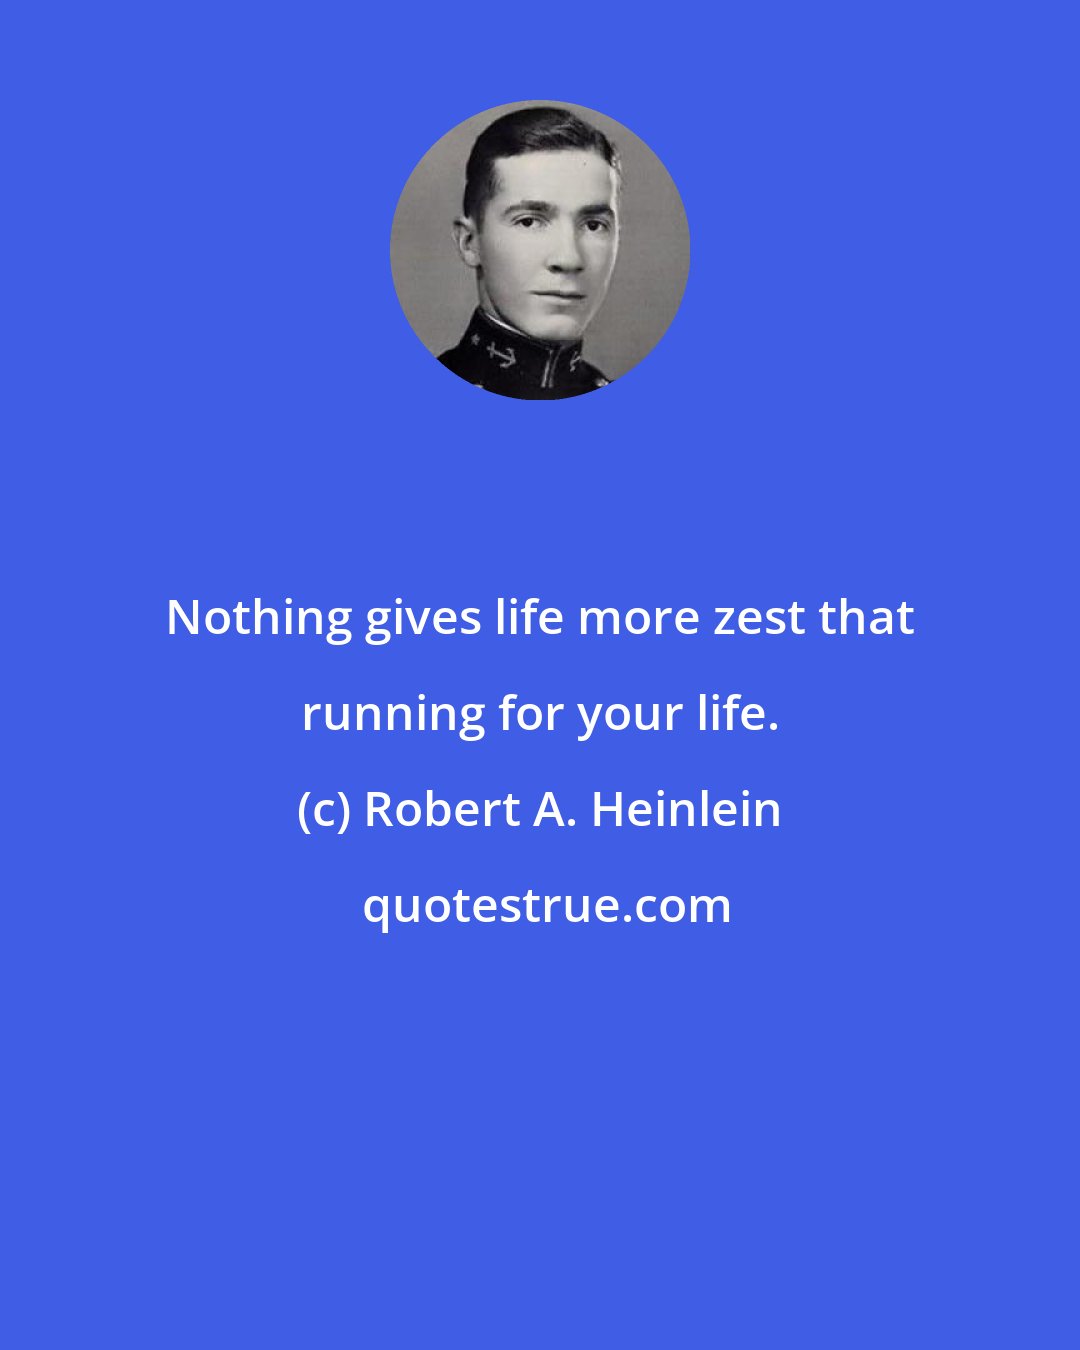 Robert A. Heinlein: Nothing gives life more zest that running for your life.